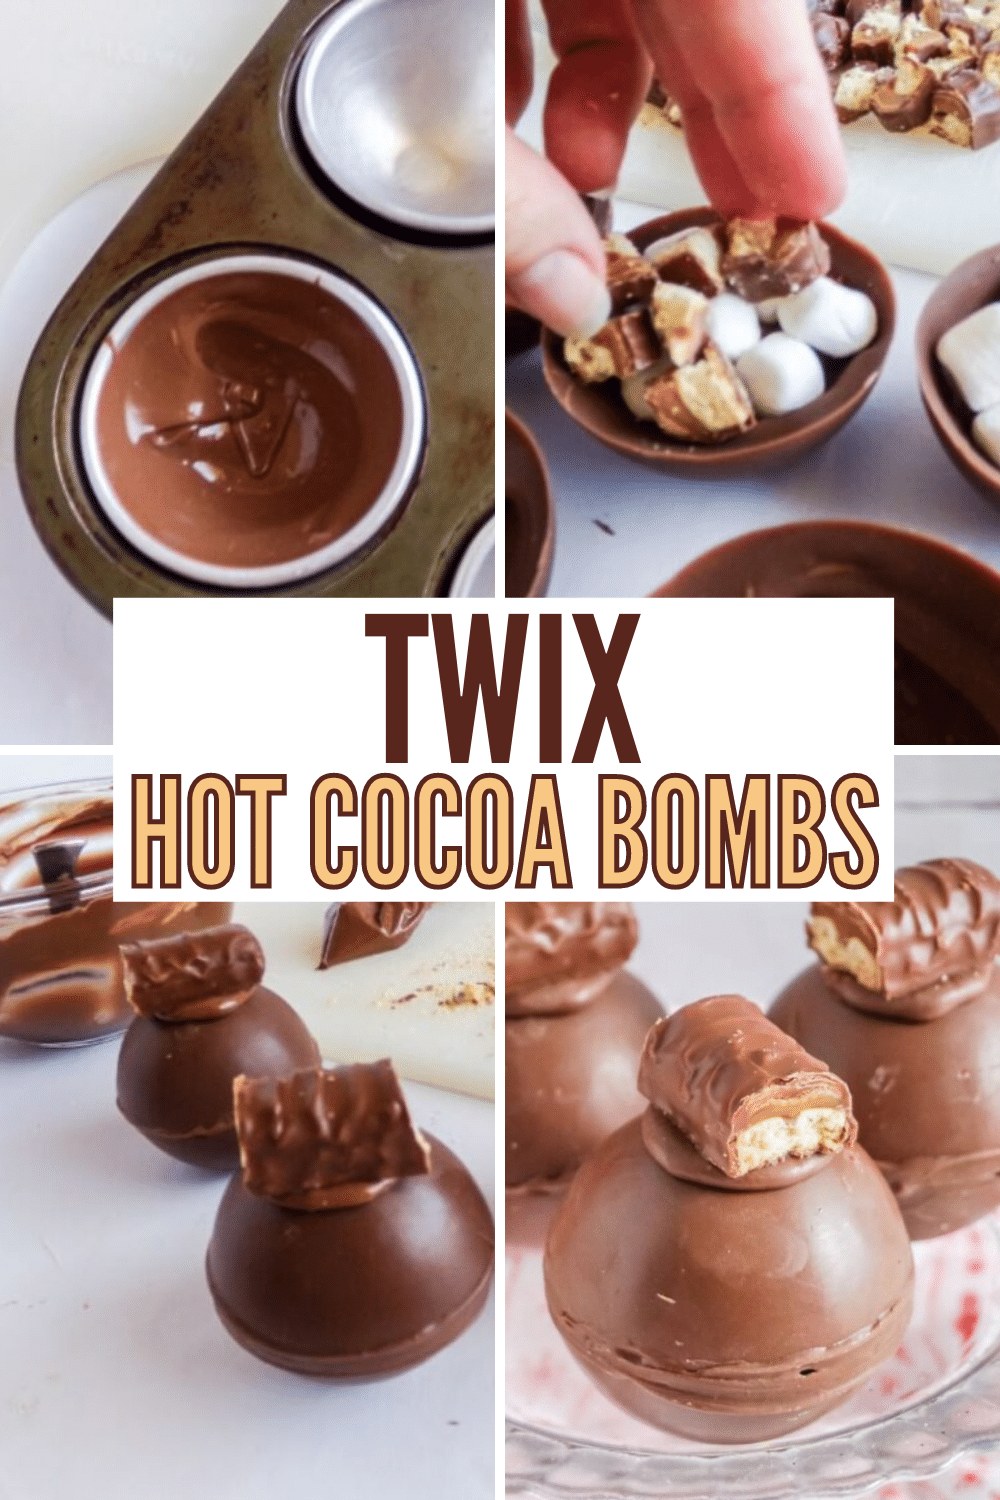 These Twix Hot Cocoa Bombs taste EXACTLY like a Twix Candy Bar! Who says that you shouldn't combine the flavors of candy and cocoa? #hotcocoabombs #hotcocoa #twix #recipe #cocoa via @wondermomwannab